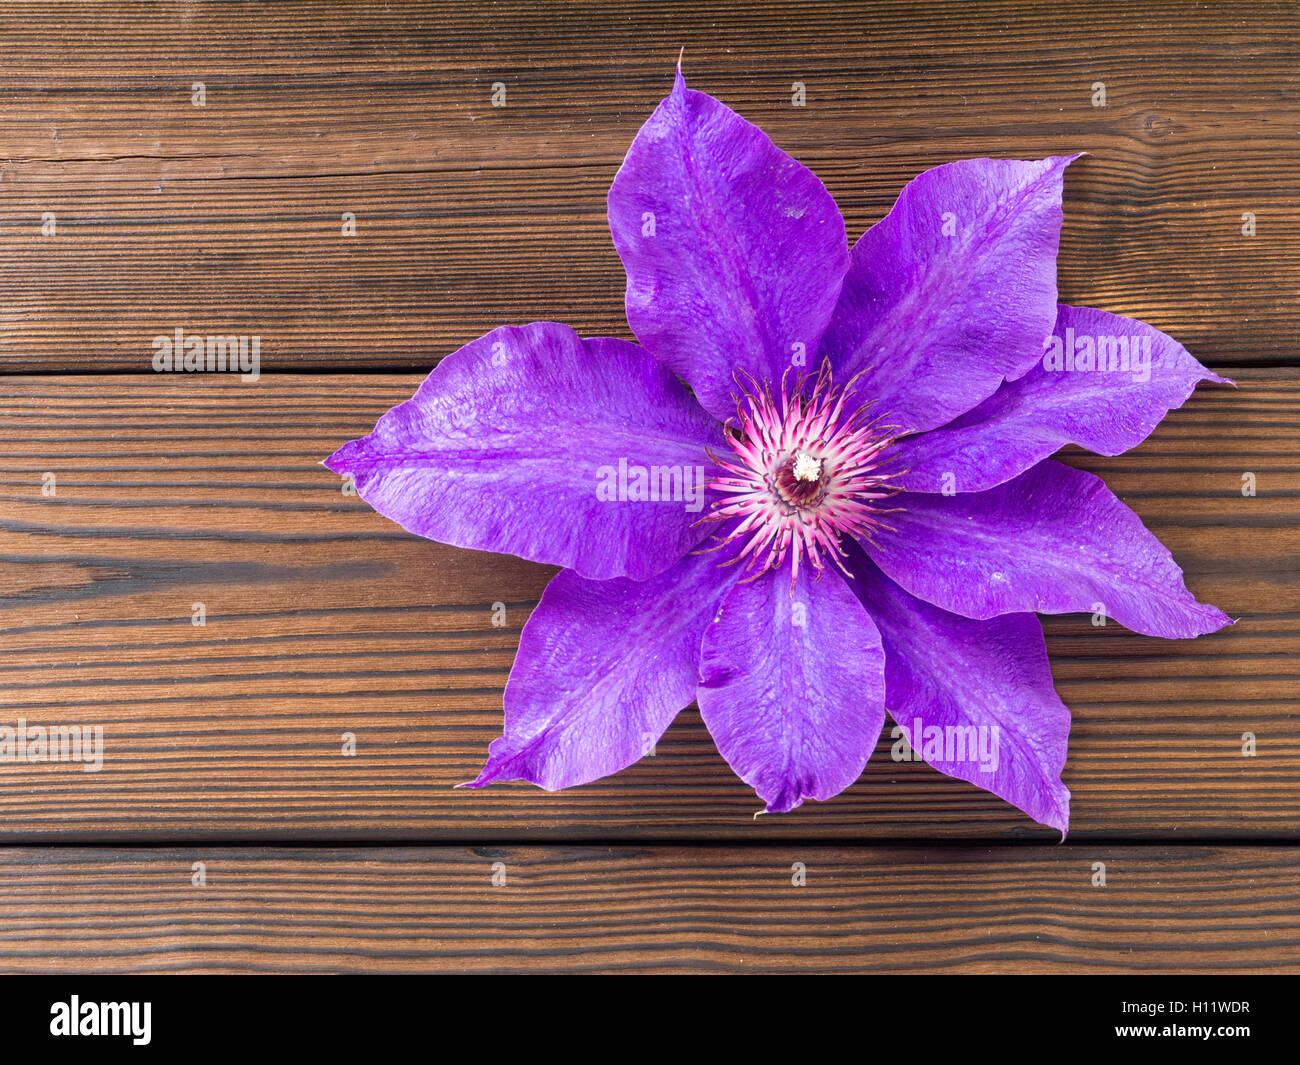 Violet clematis flower on the textured wooden planks Stock Photo